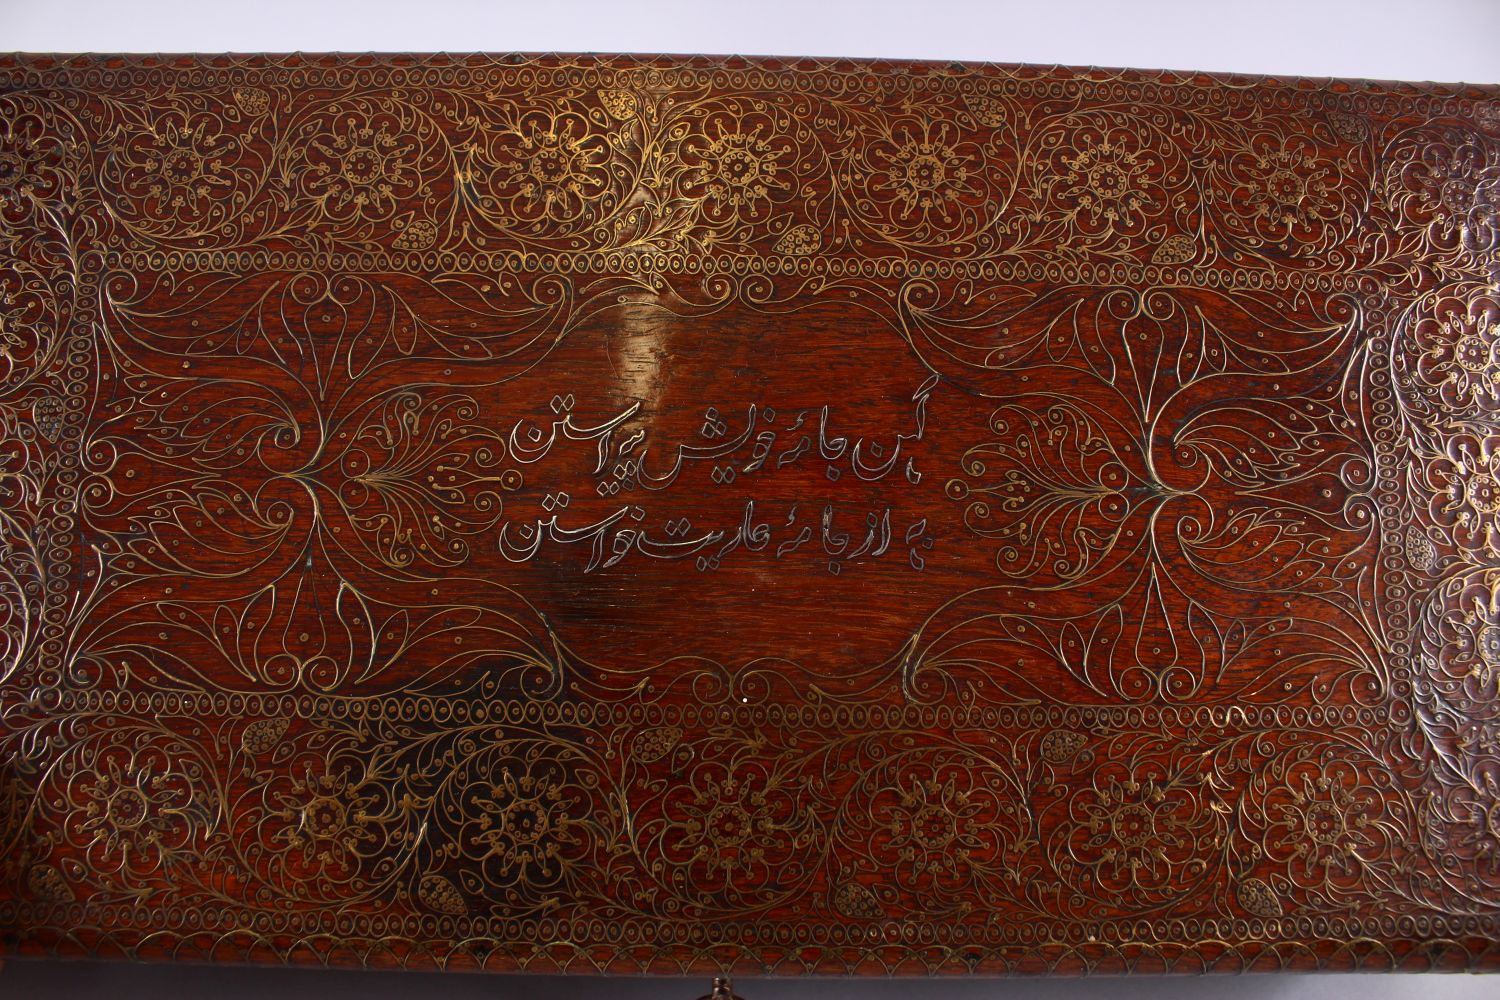 A FINE 19TH CENTURY INDO PERSIAN SILVER AND BRASS INLAID WOODEN BOX, with inlaid formal scroll - Image 3 of 7